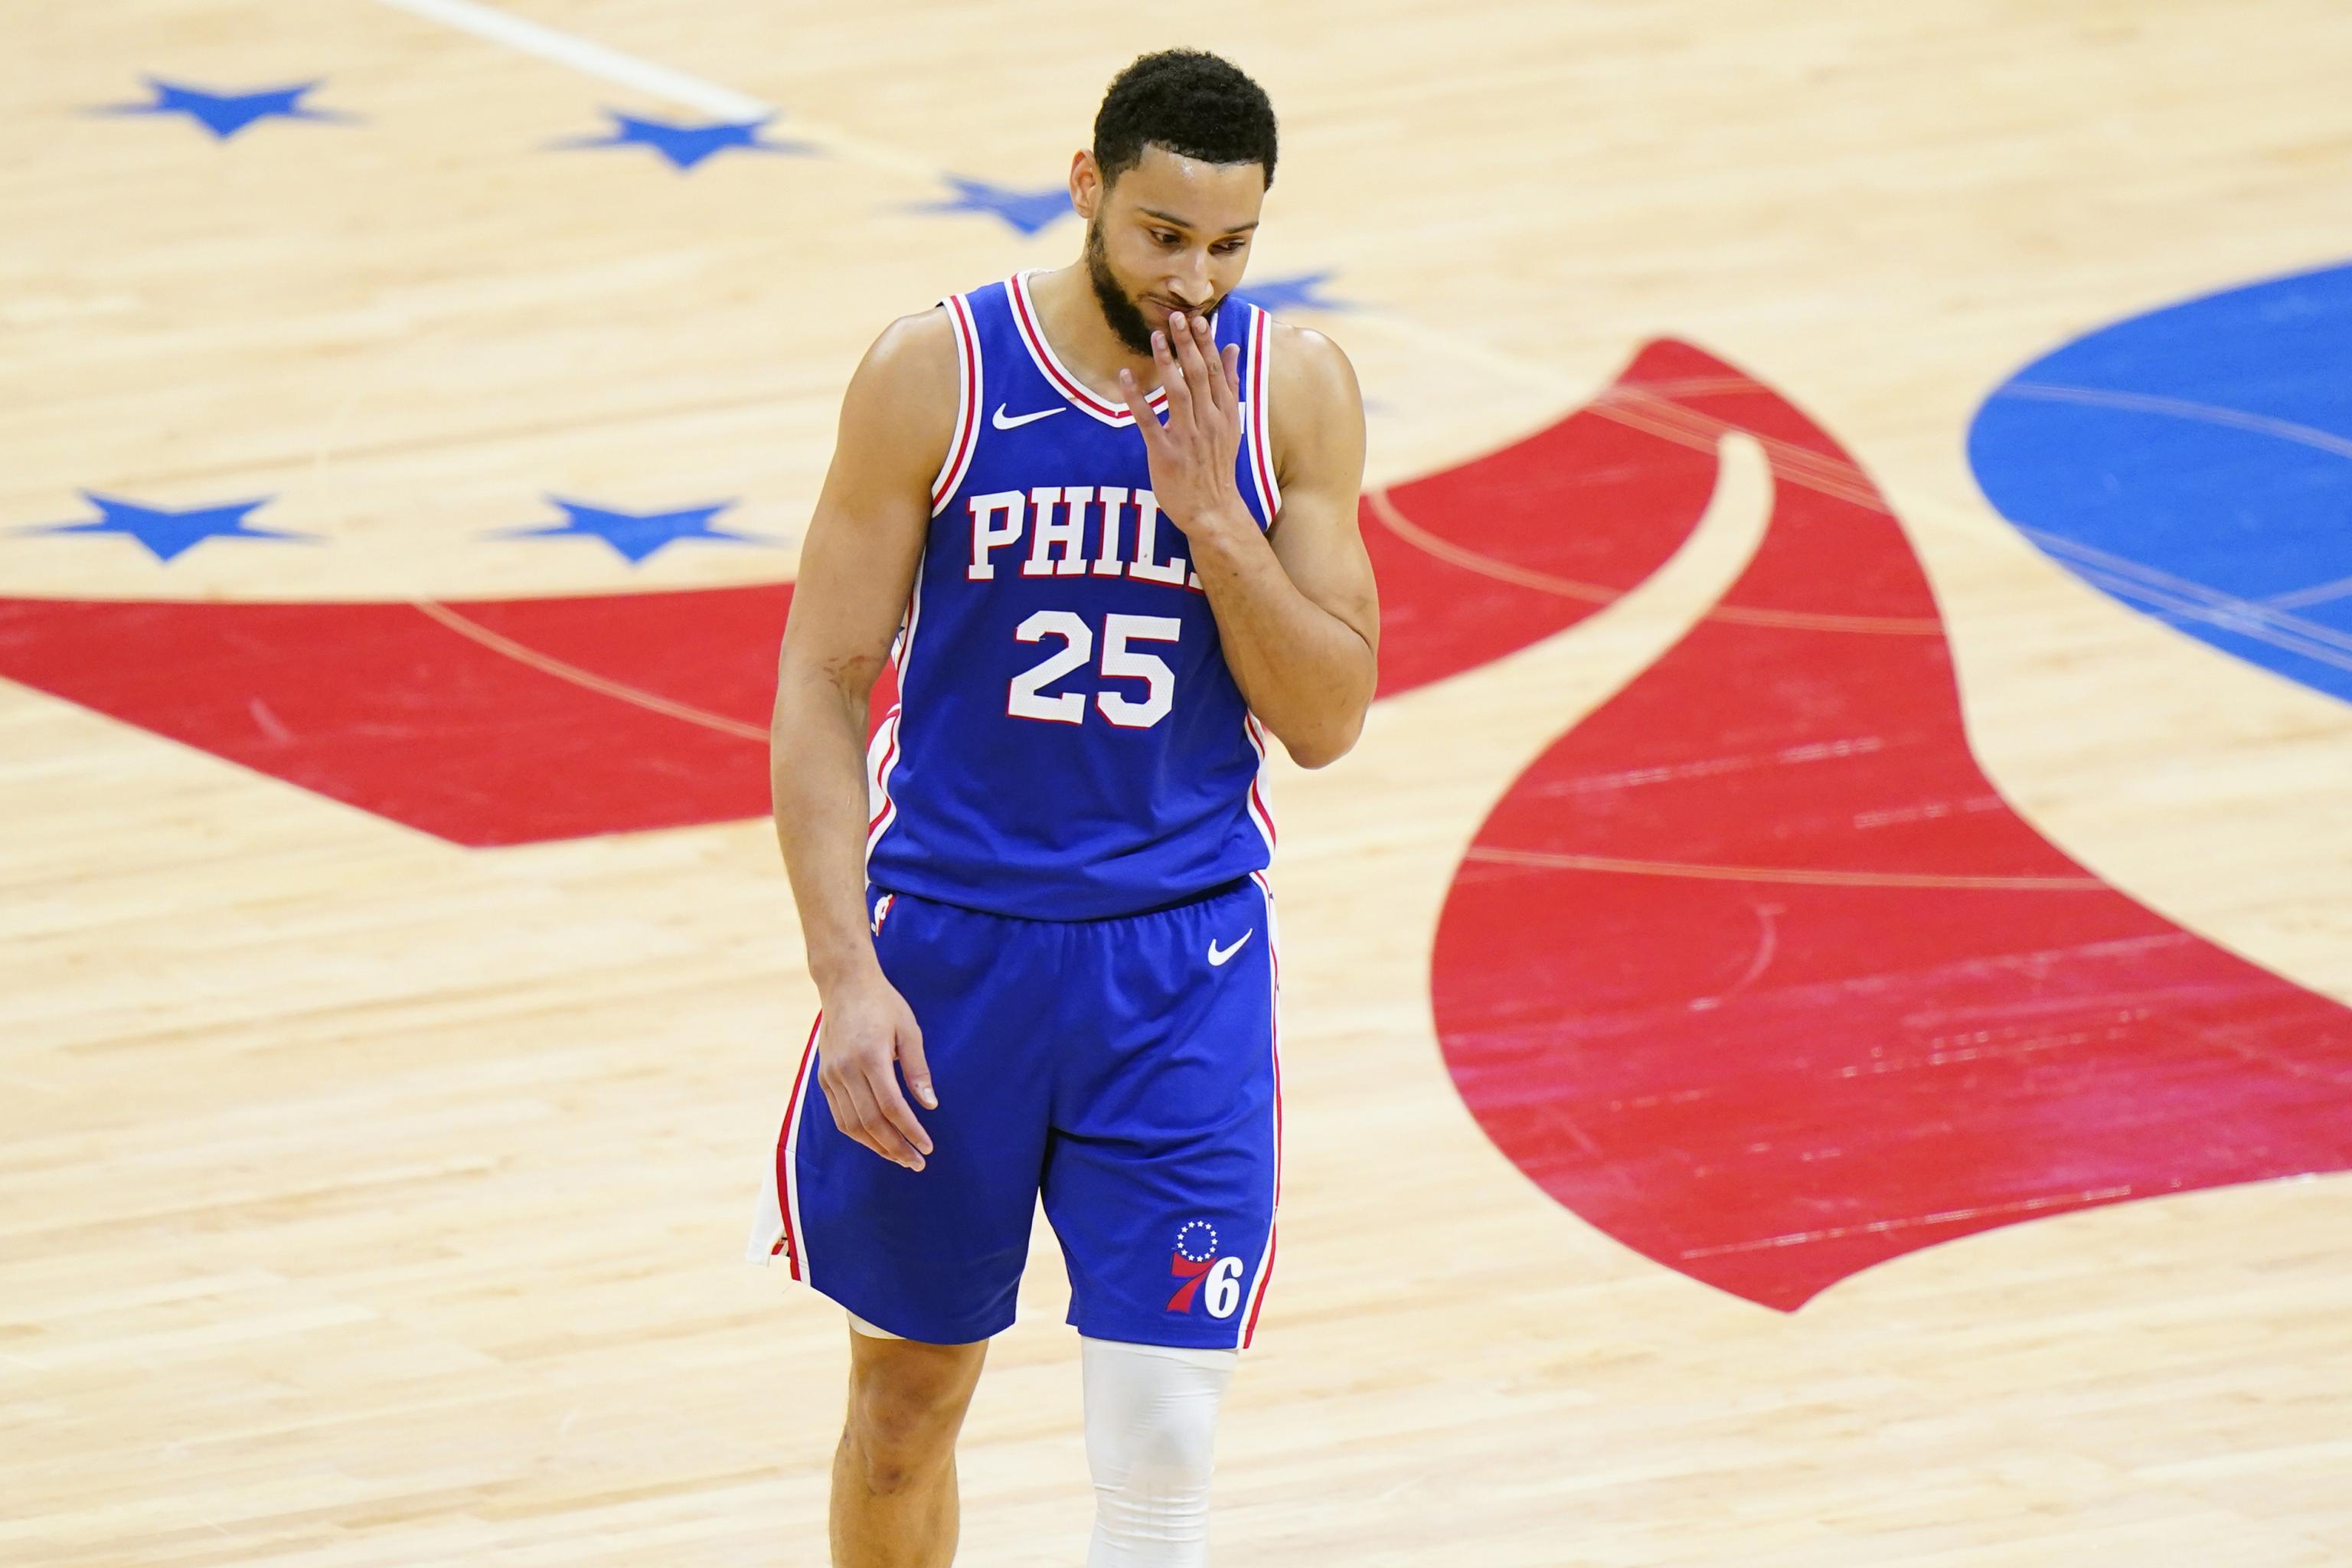 As new images emerge on Instagram, more signs Ben Simmons